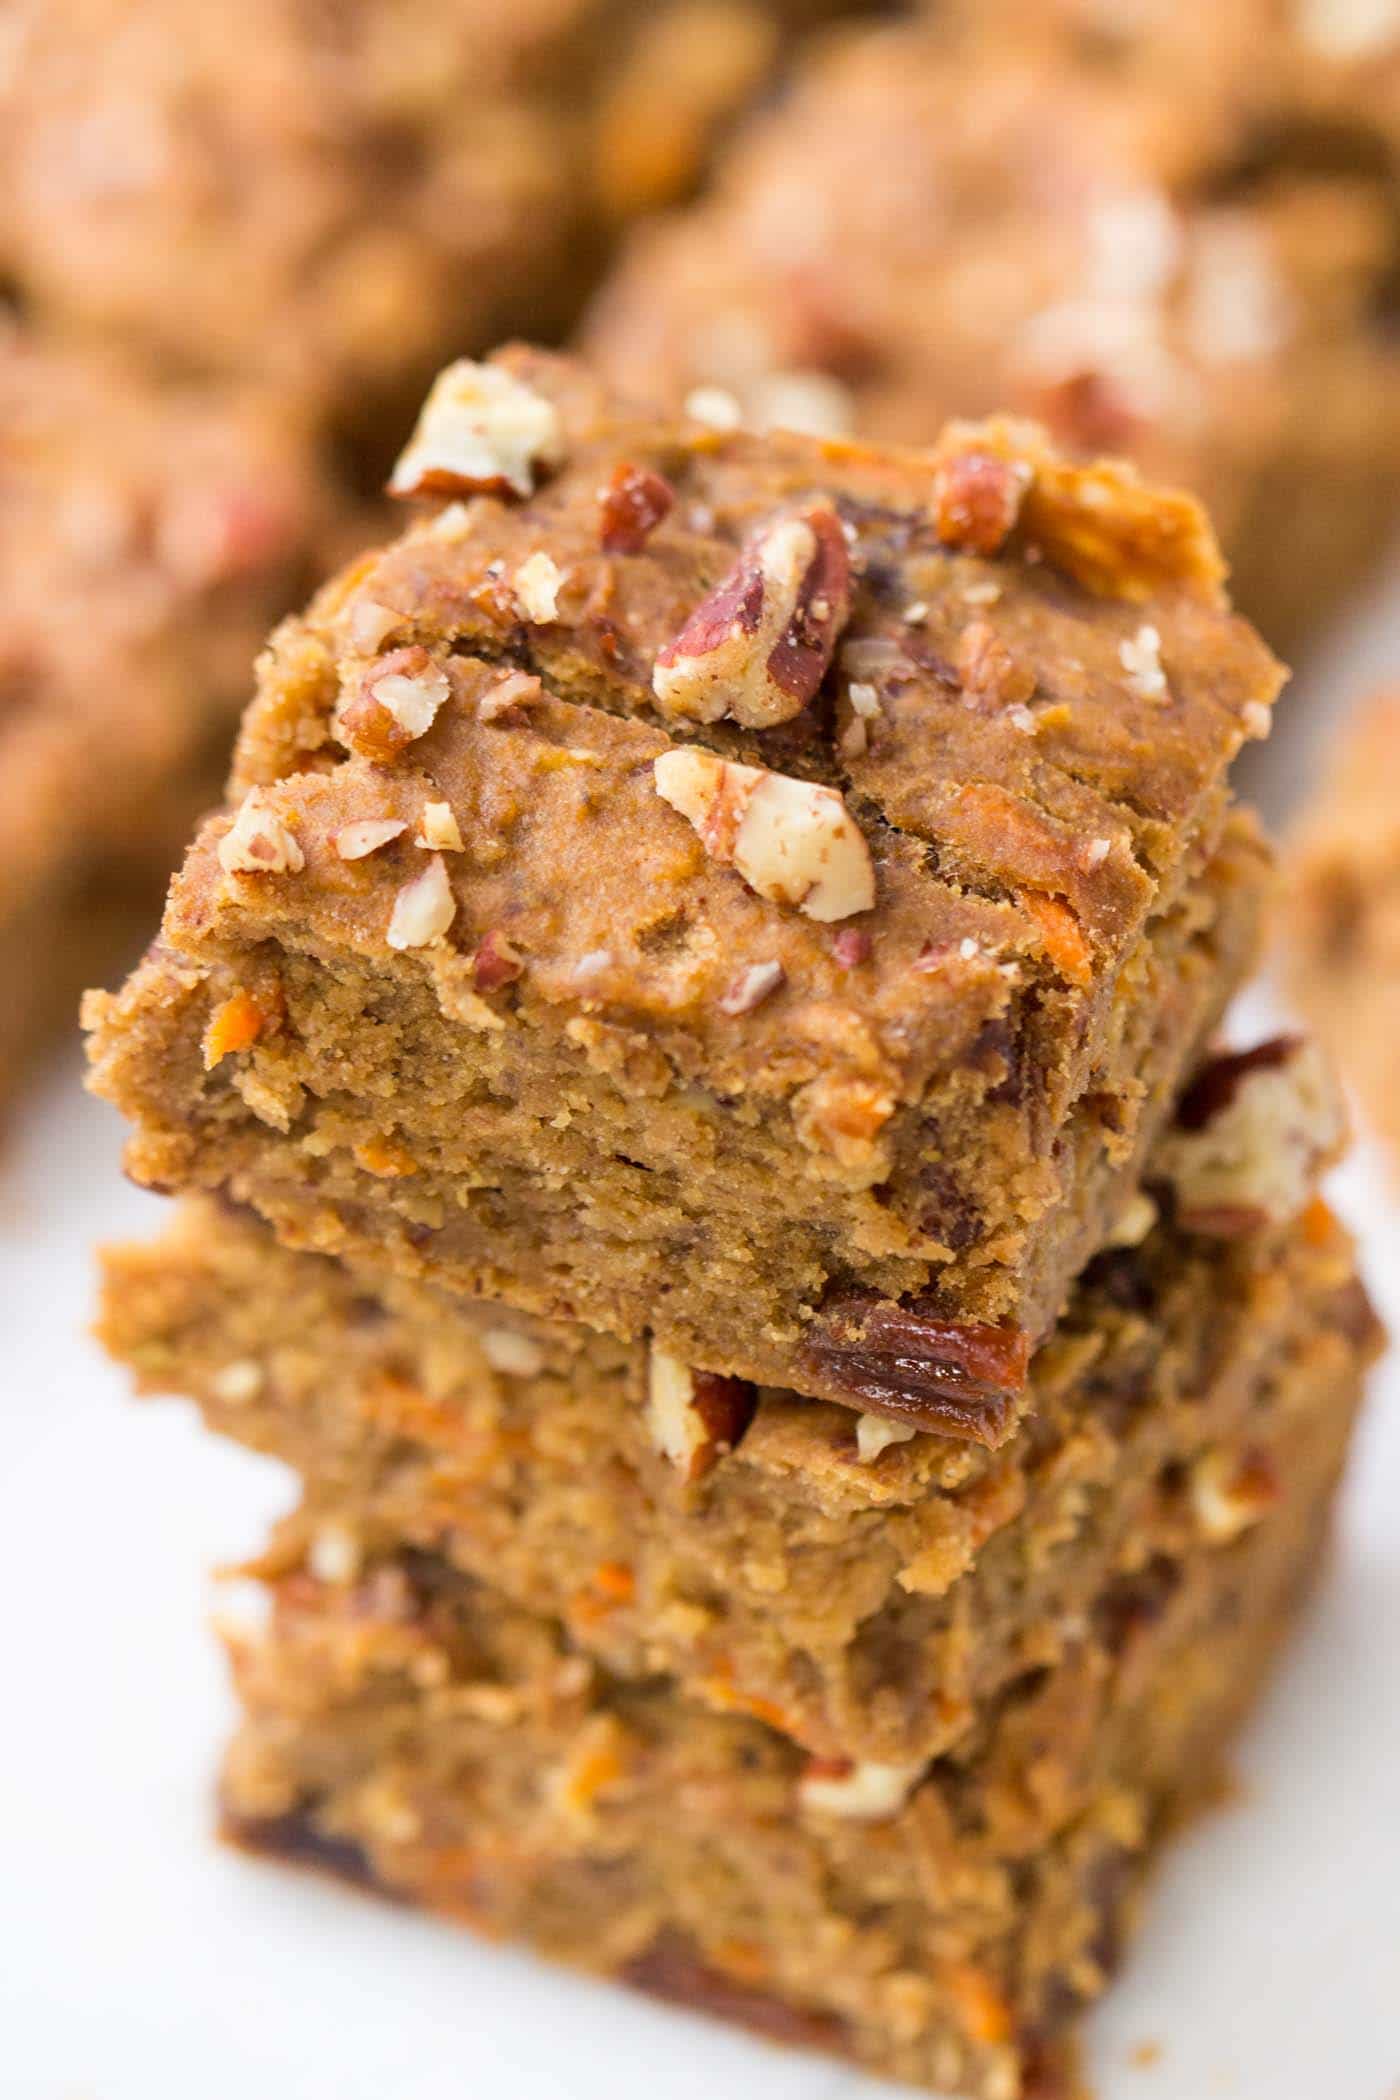 These HEALTHY Morning Glory Breakfast Bars are made with quinoa flour, sweetened naturally AND are packed with protein!